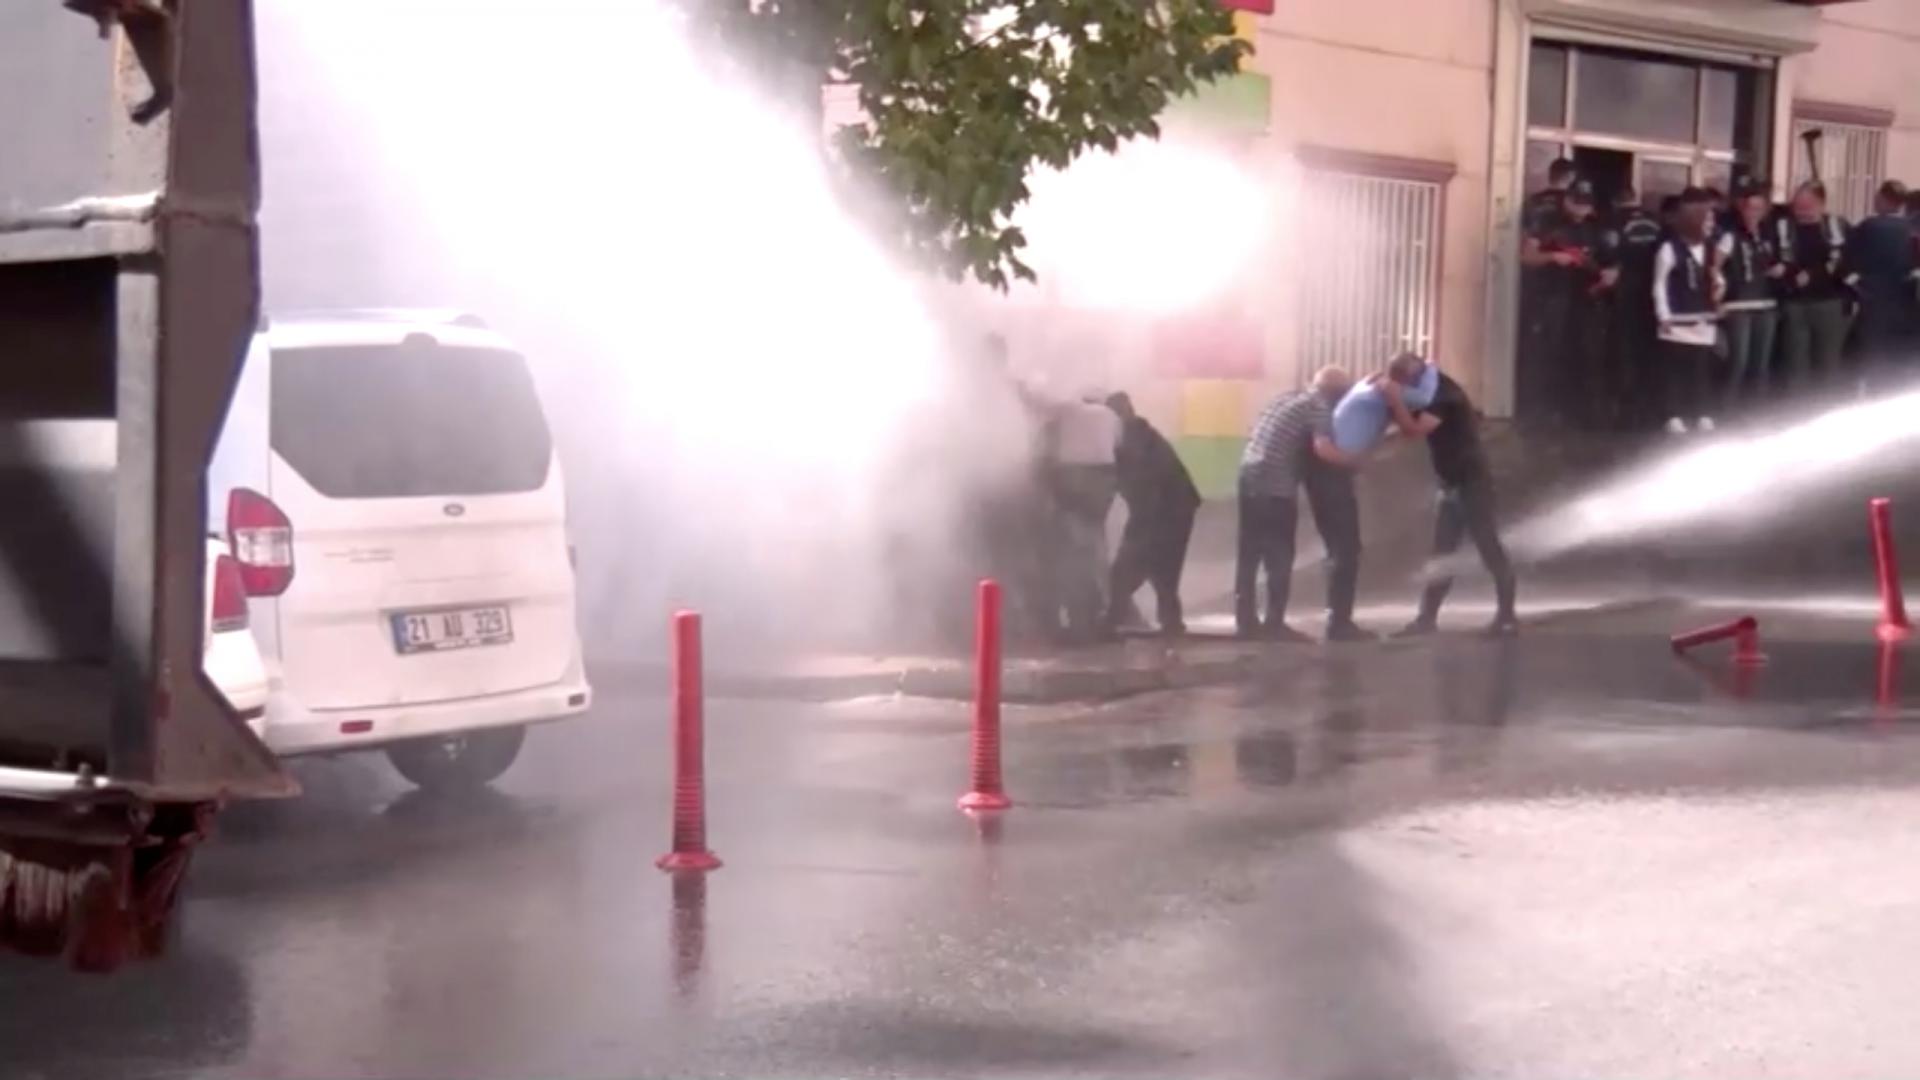 Kurds protesting Turkey's Syria operation are hit by water sprayed from a water cannon in Diyarbakir